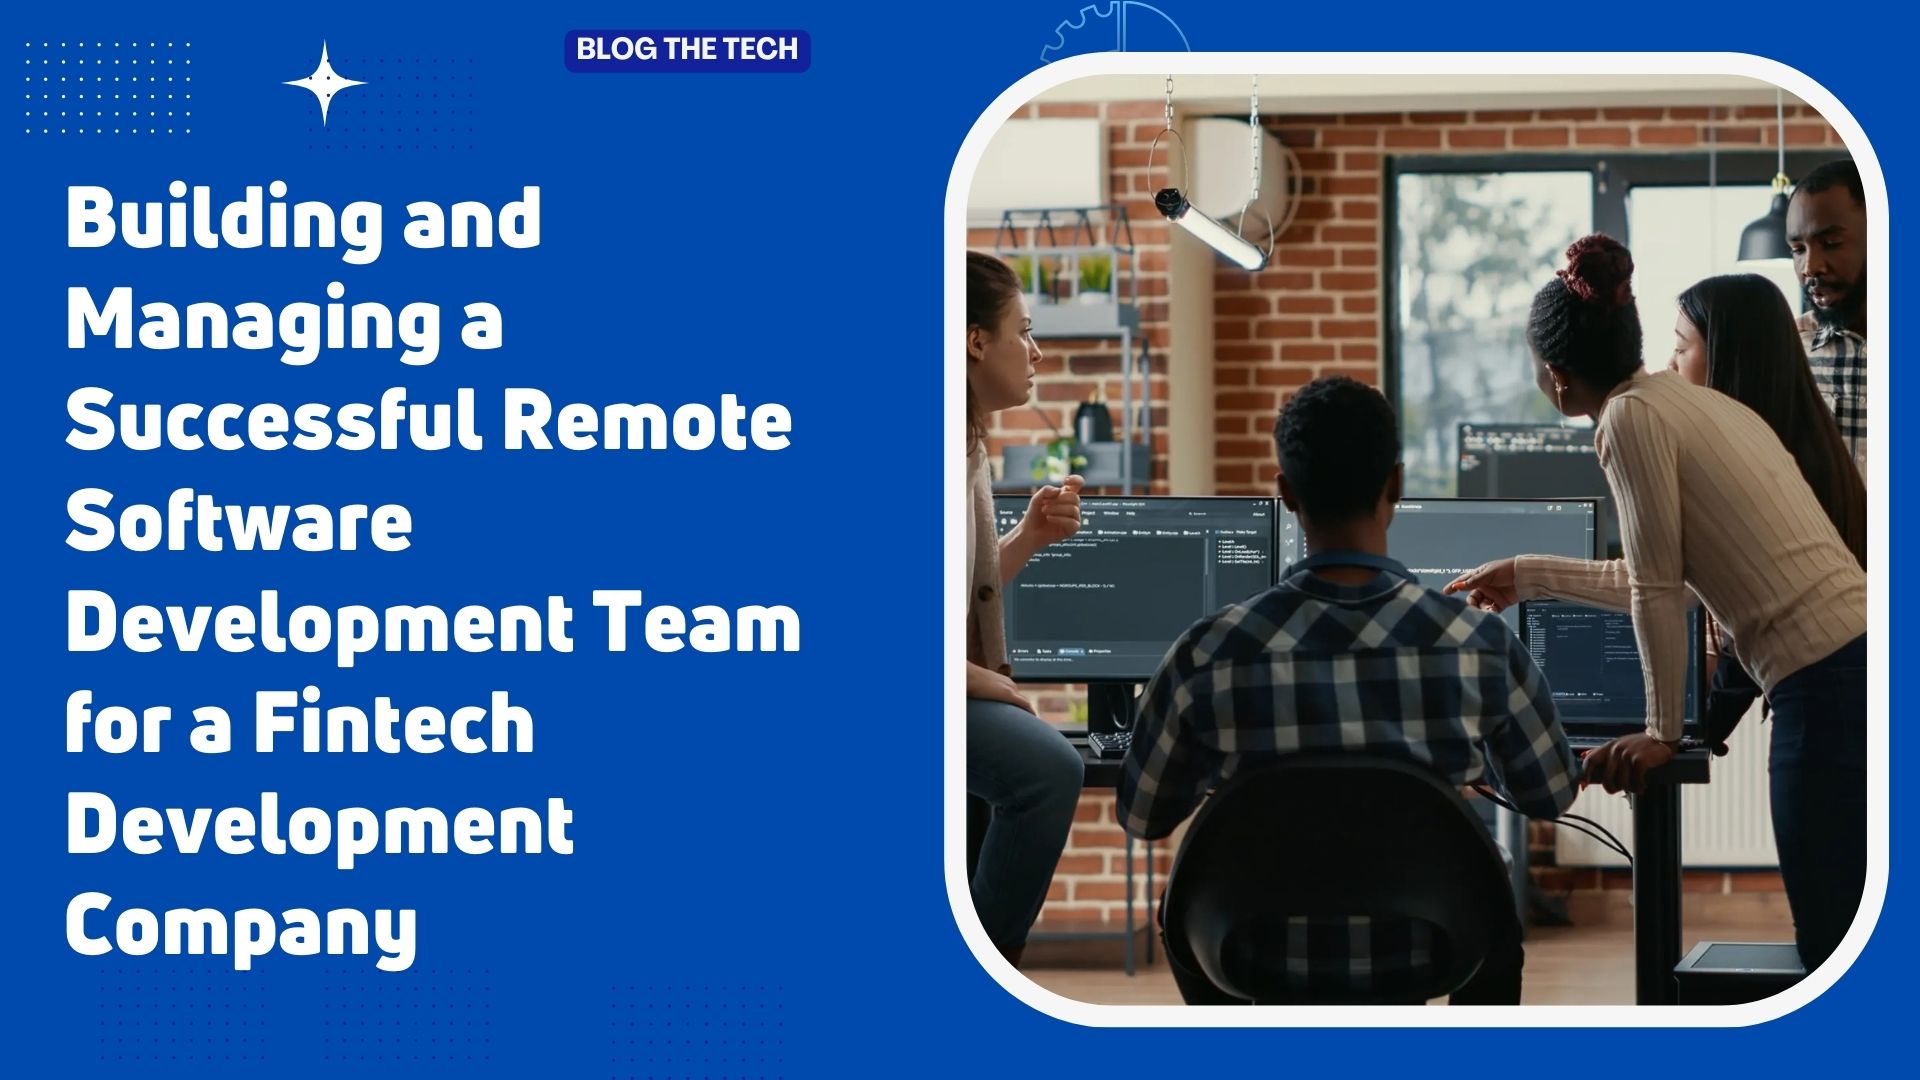 Building and Managing a Successful Remote Software Development Team for a Fintech Development Company